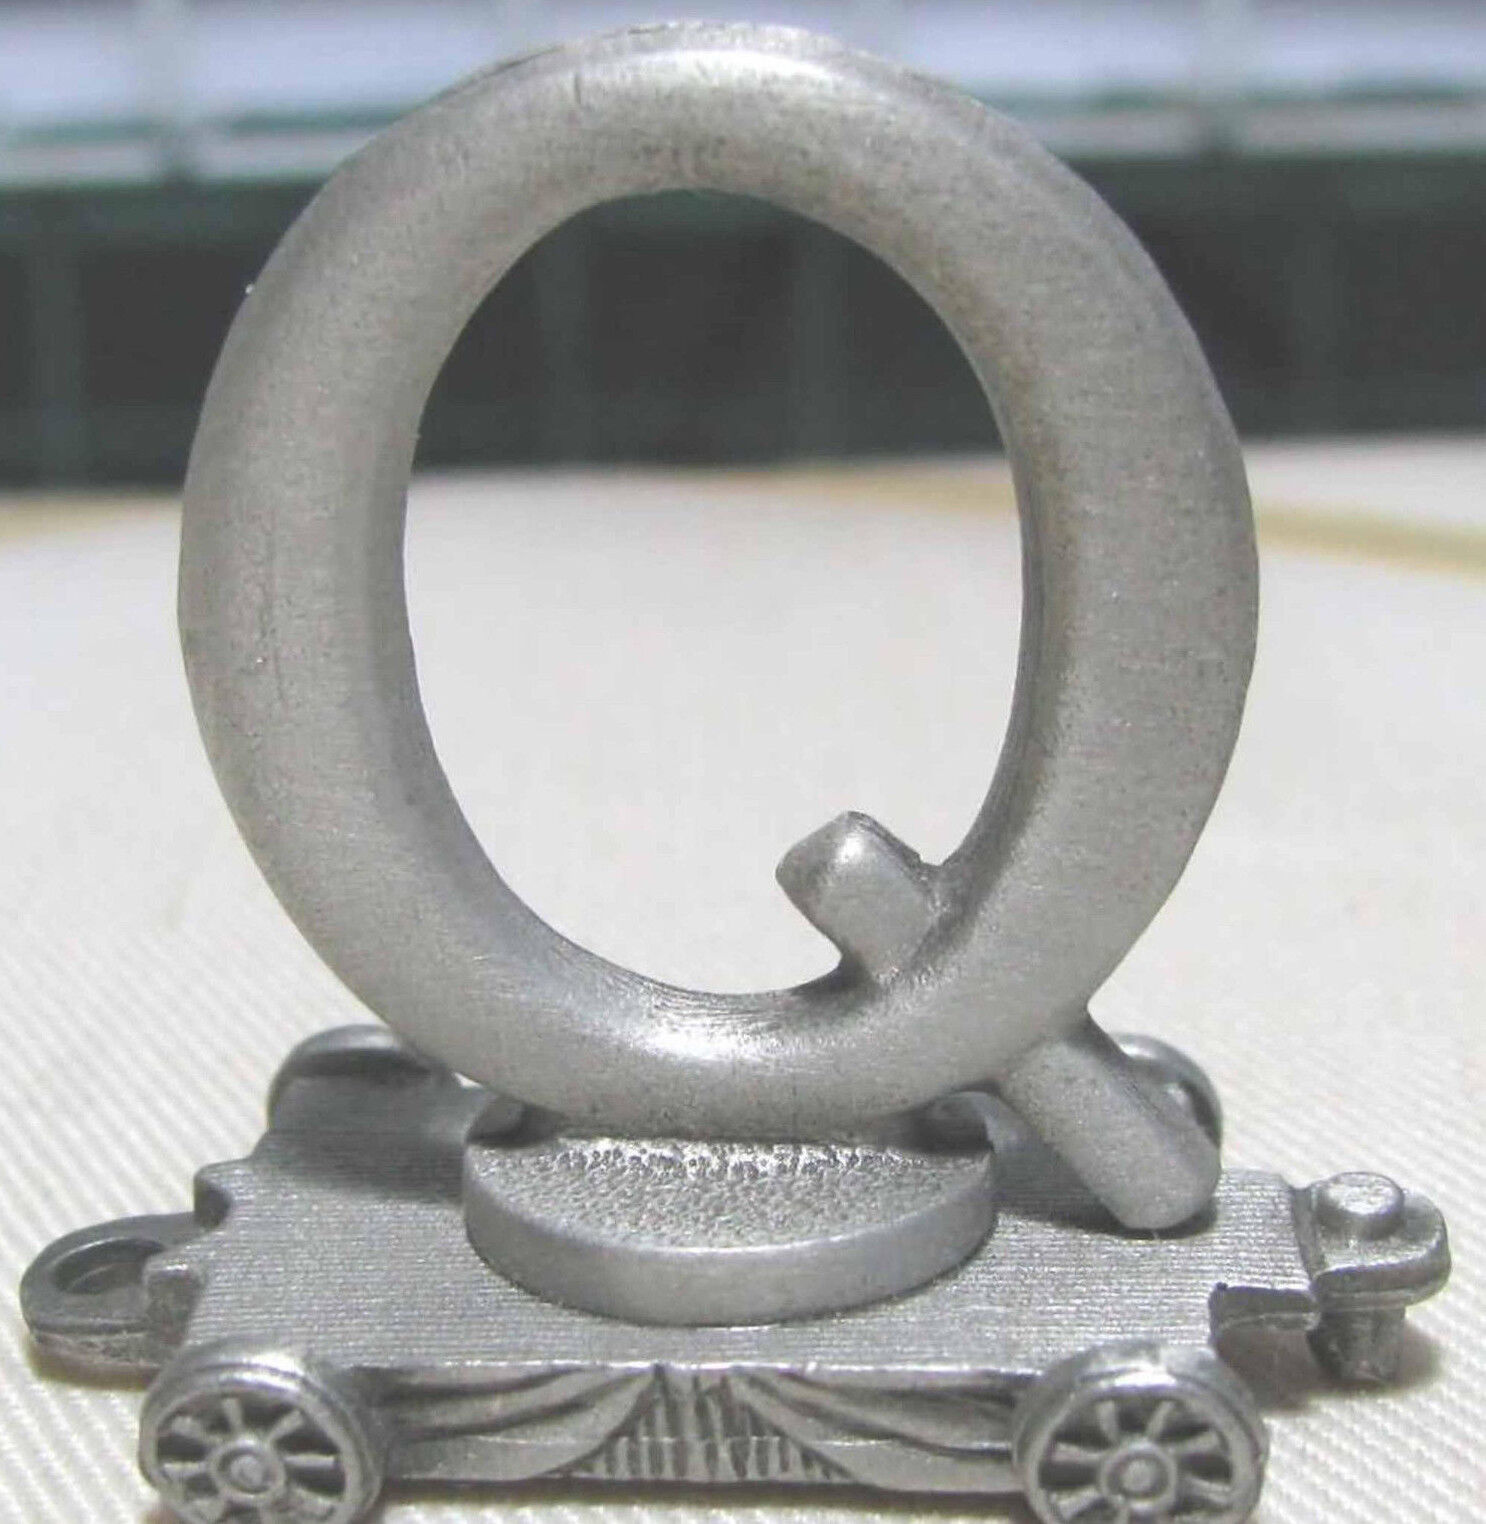 LETTER Q FORT PEWTER - LASTING EXPRESSIONS PEWTER TRAIN CAR Vintage Miniature .